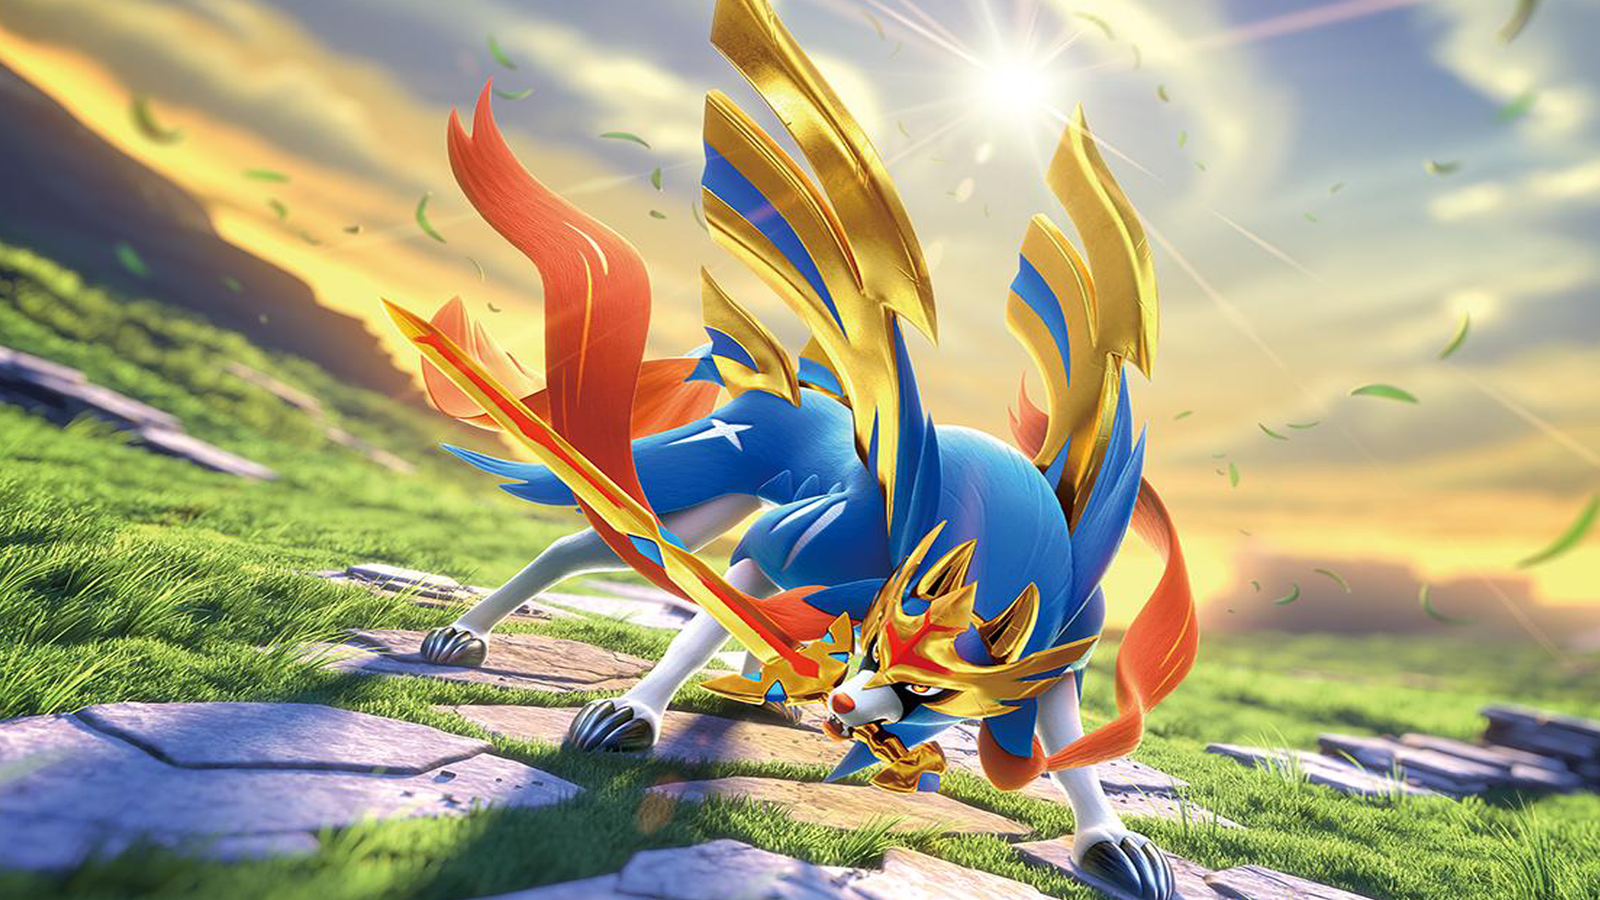 Sovereign Sword: Zacian Move Effect and Cooldown